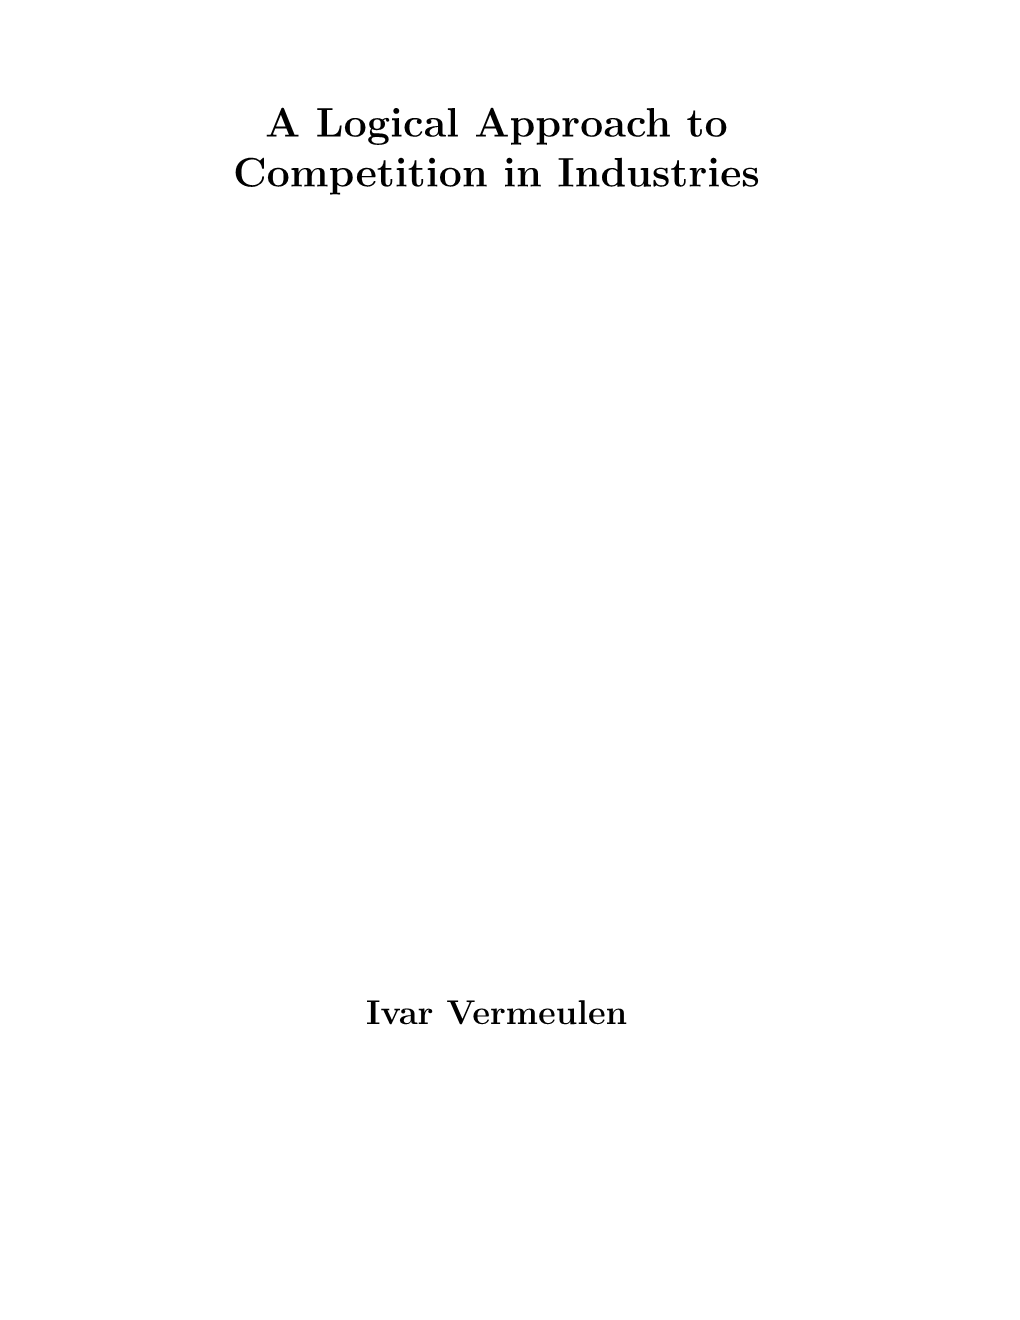 A Logical Approach to Competition in Industries